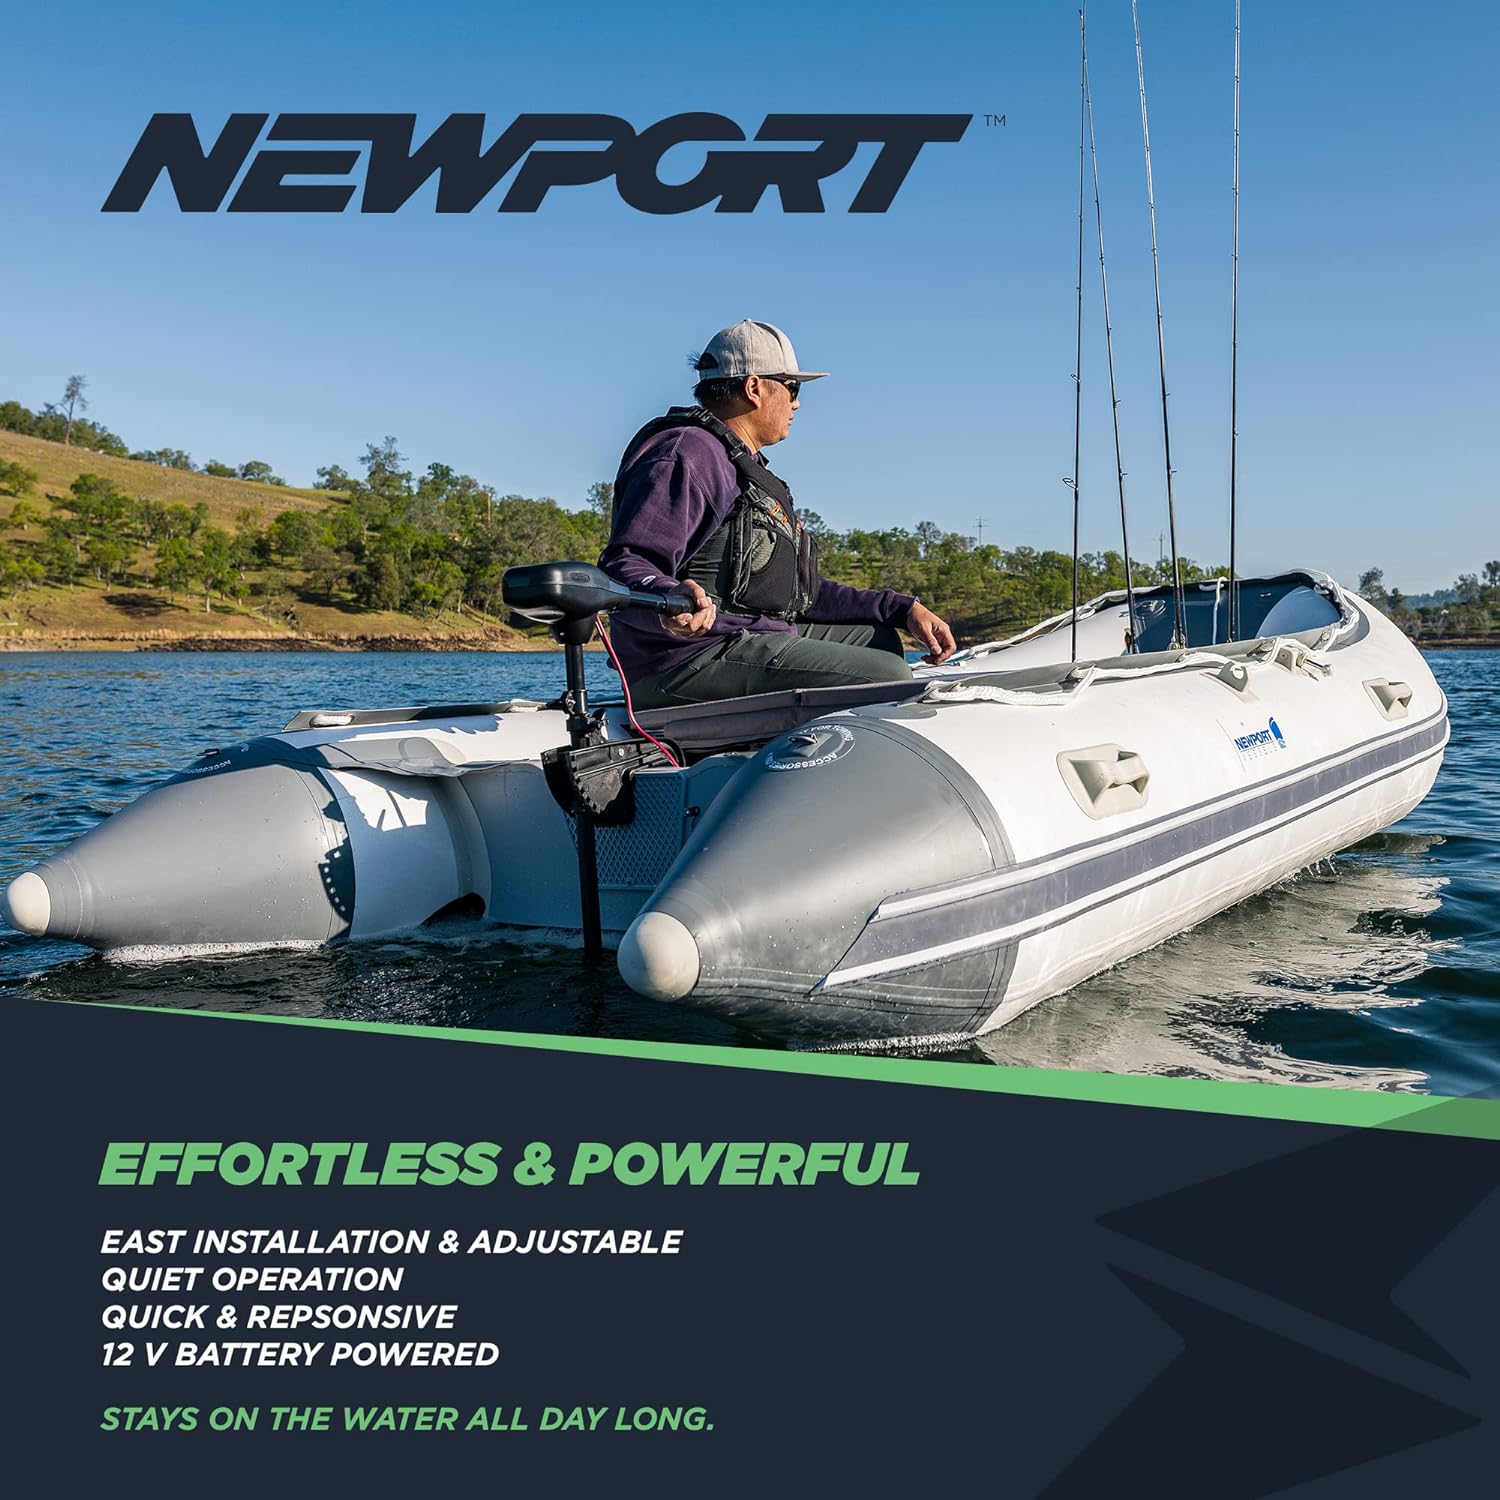 Newport NV-Series Thrust Saltwater Transom Mounted Trolling Electric Trolling Motor w/LED Battery Indicator - Newport NV-Series Thrust Saltwater Transom Motor Review